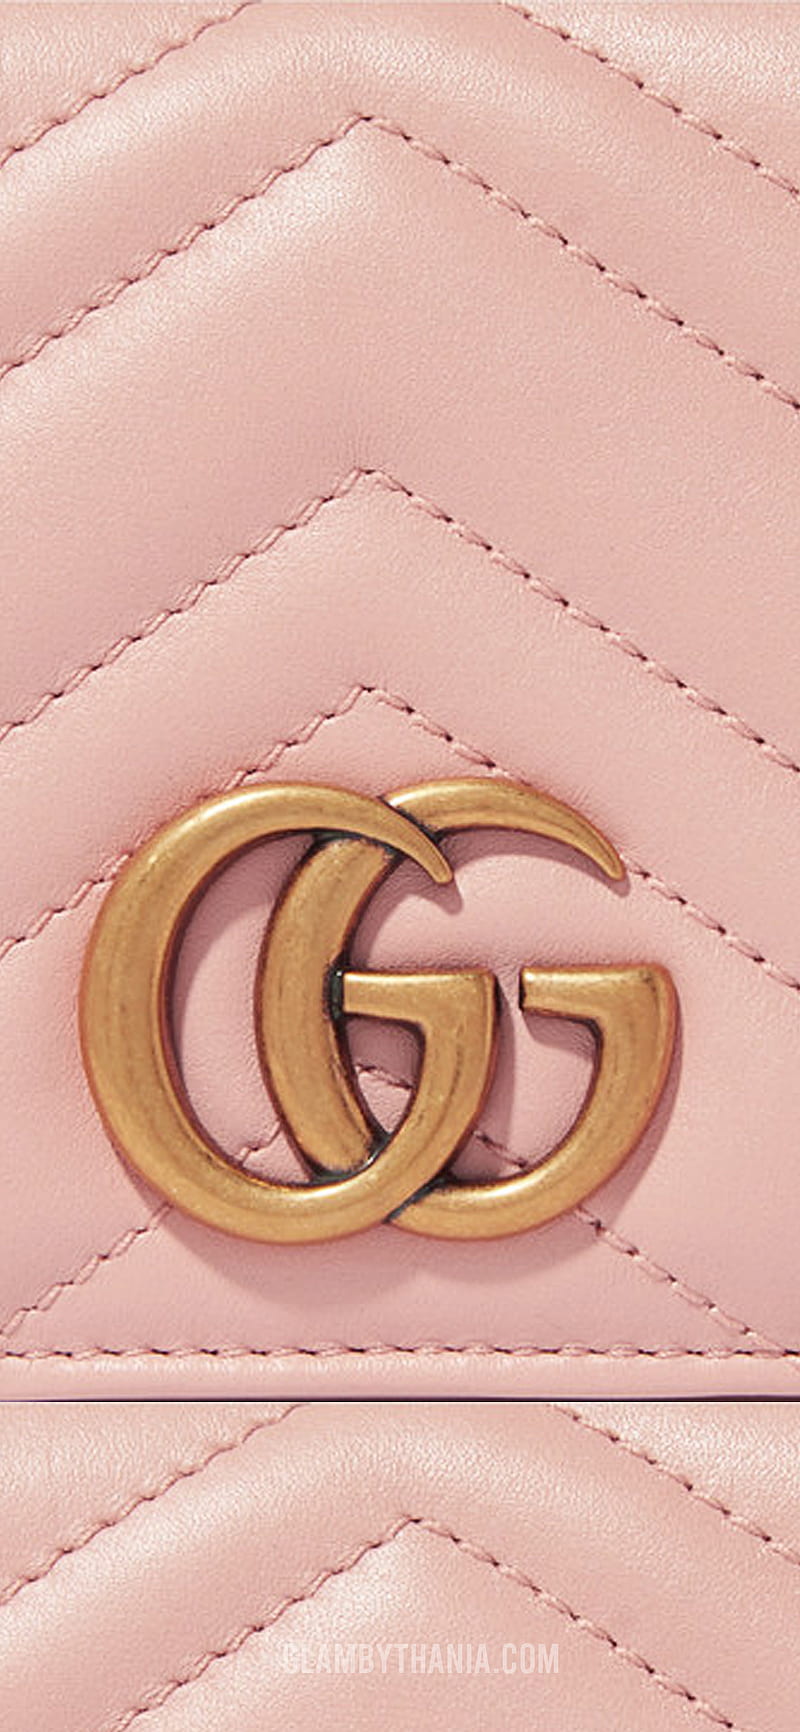 Gucci Wallpaper Discover more Background, cool, Gold, Iphone, Lock Screen  wallpapers. htt…